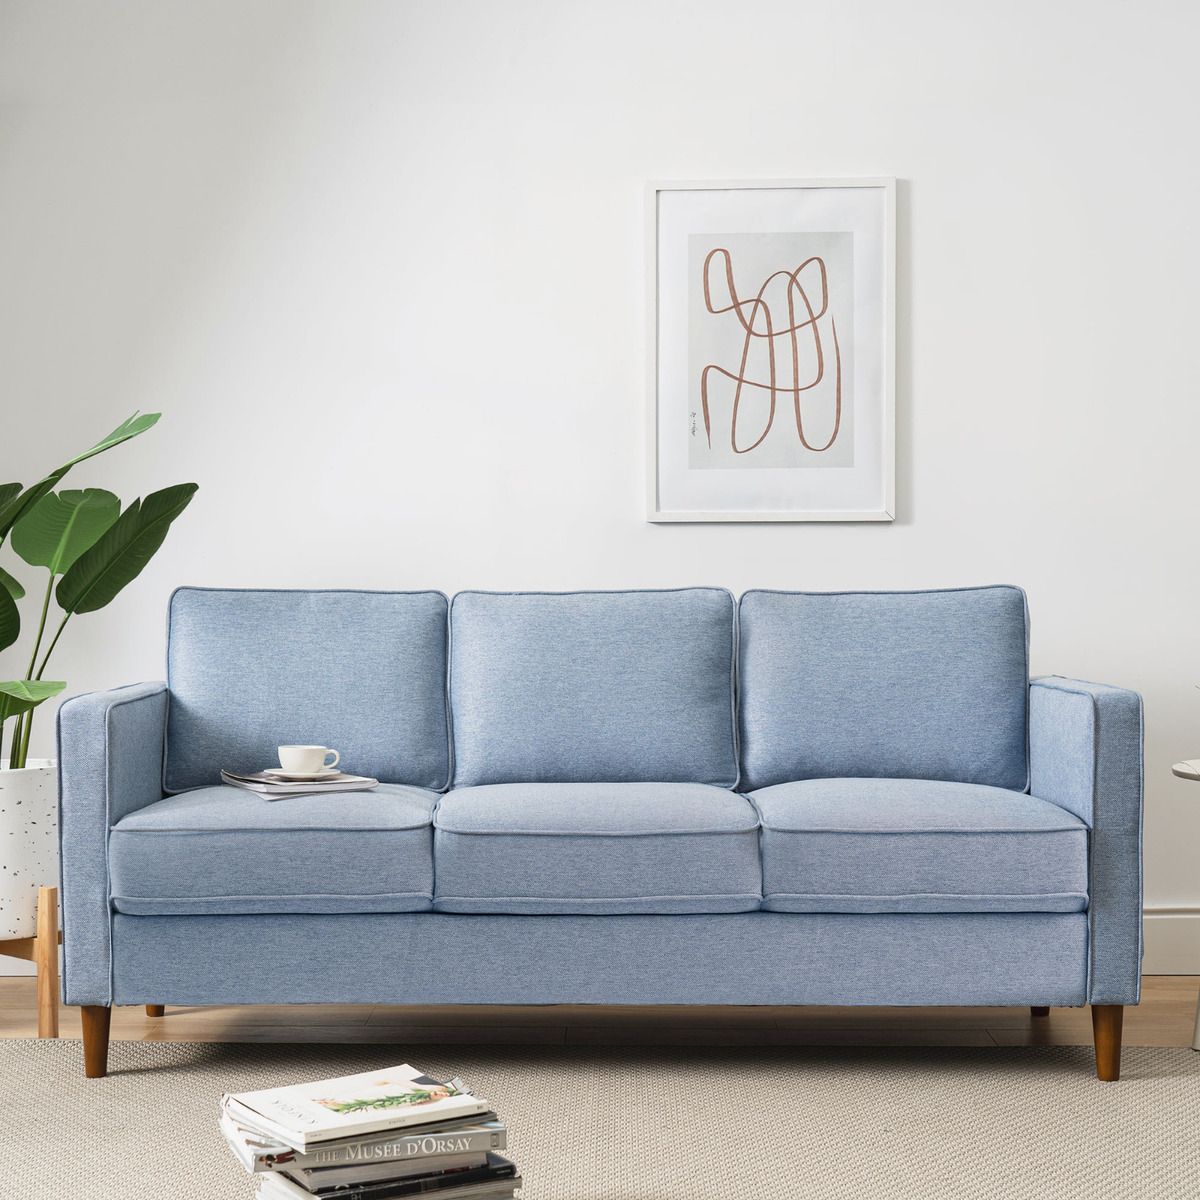 Living Room Sofa Couch Modern 3 Seater Blue Linen Couch With Armrest  Pockets | Ebay With Regard To Modern Blue Linen Sofas (View 4 of 15)